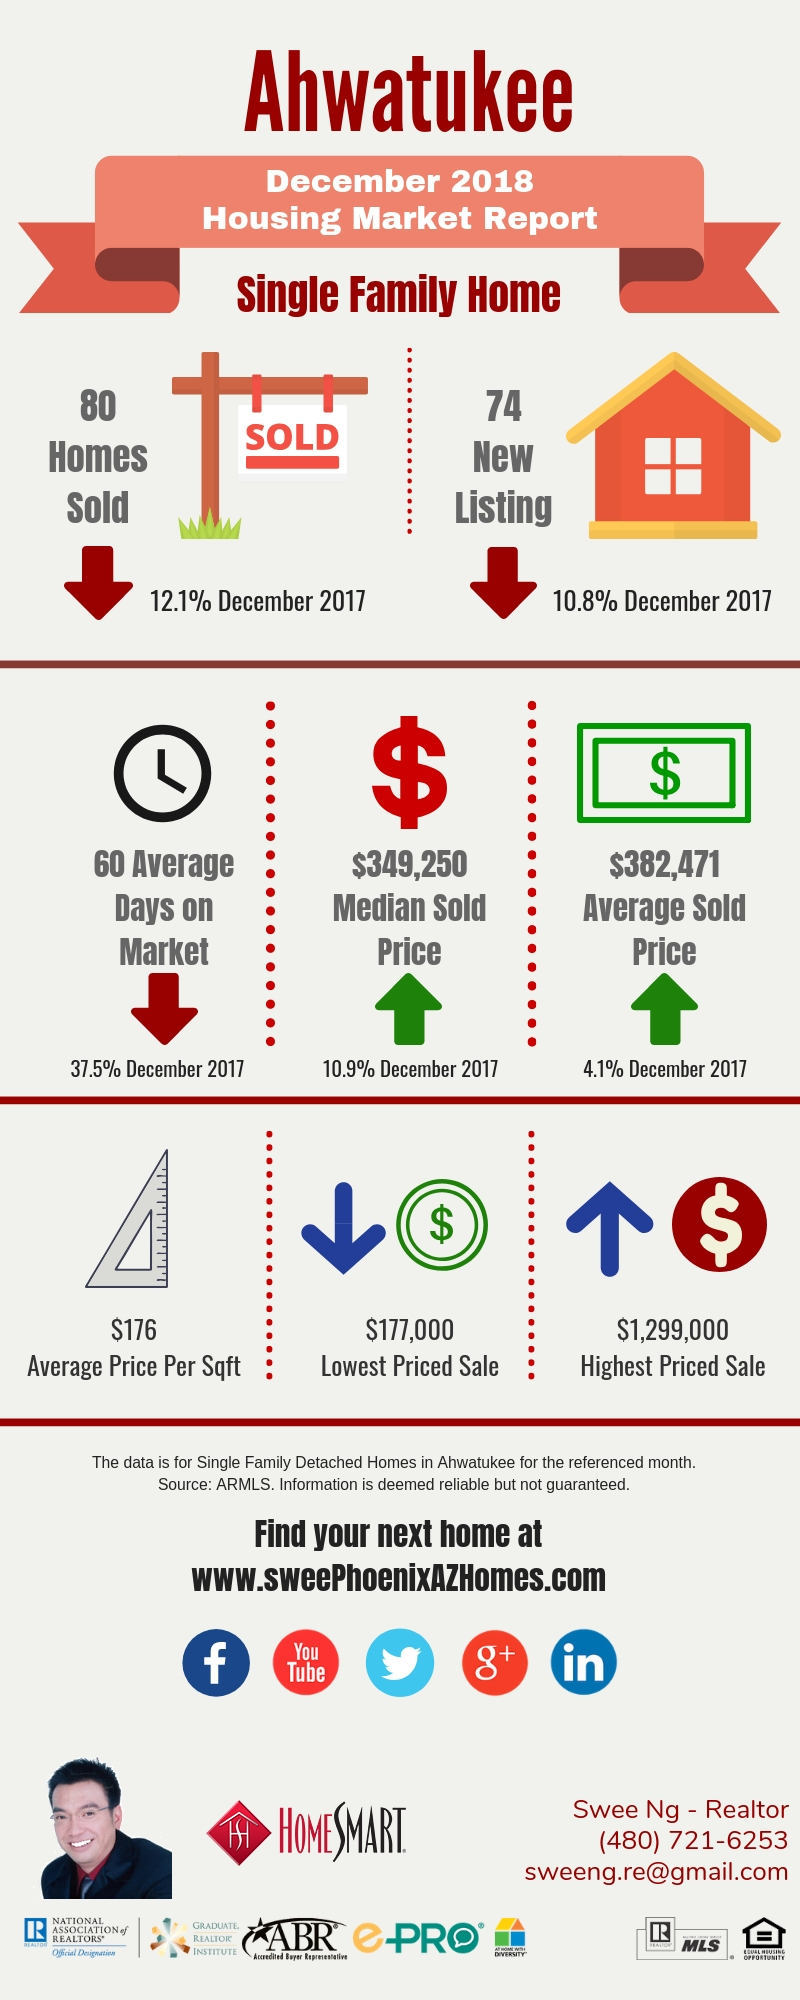 Ahwatukee Housing Market Trends Report December 2018, House Value, Real Estate and Statistic by Swee Ng